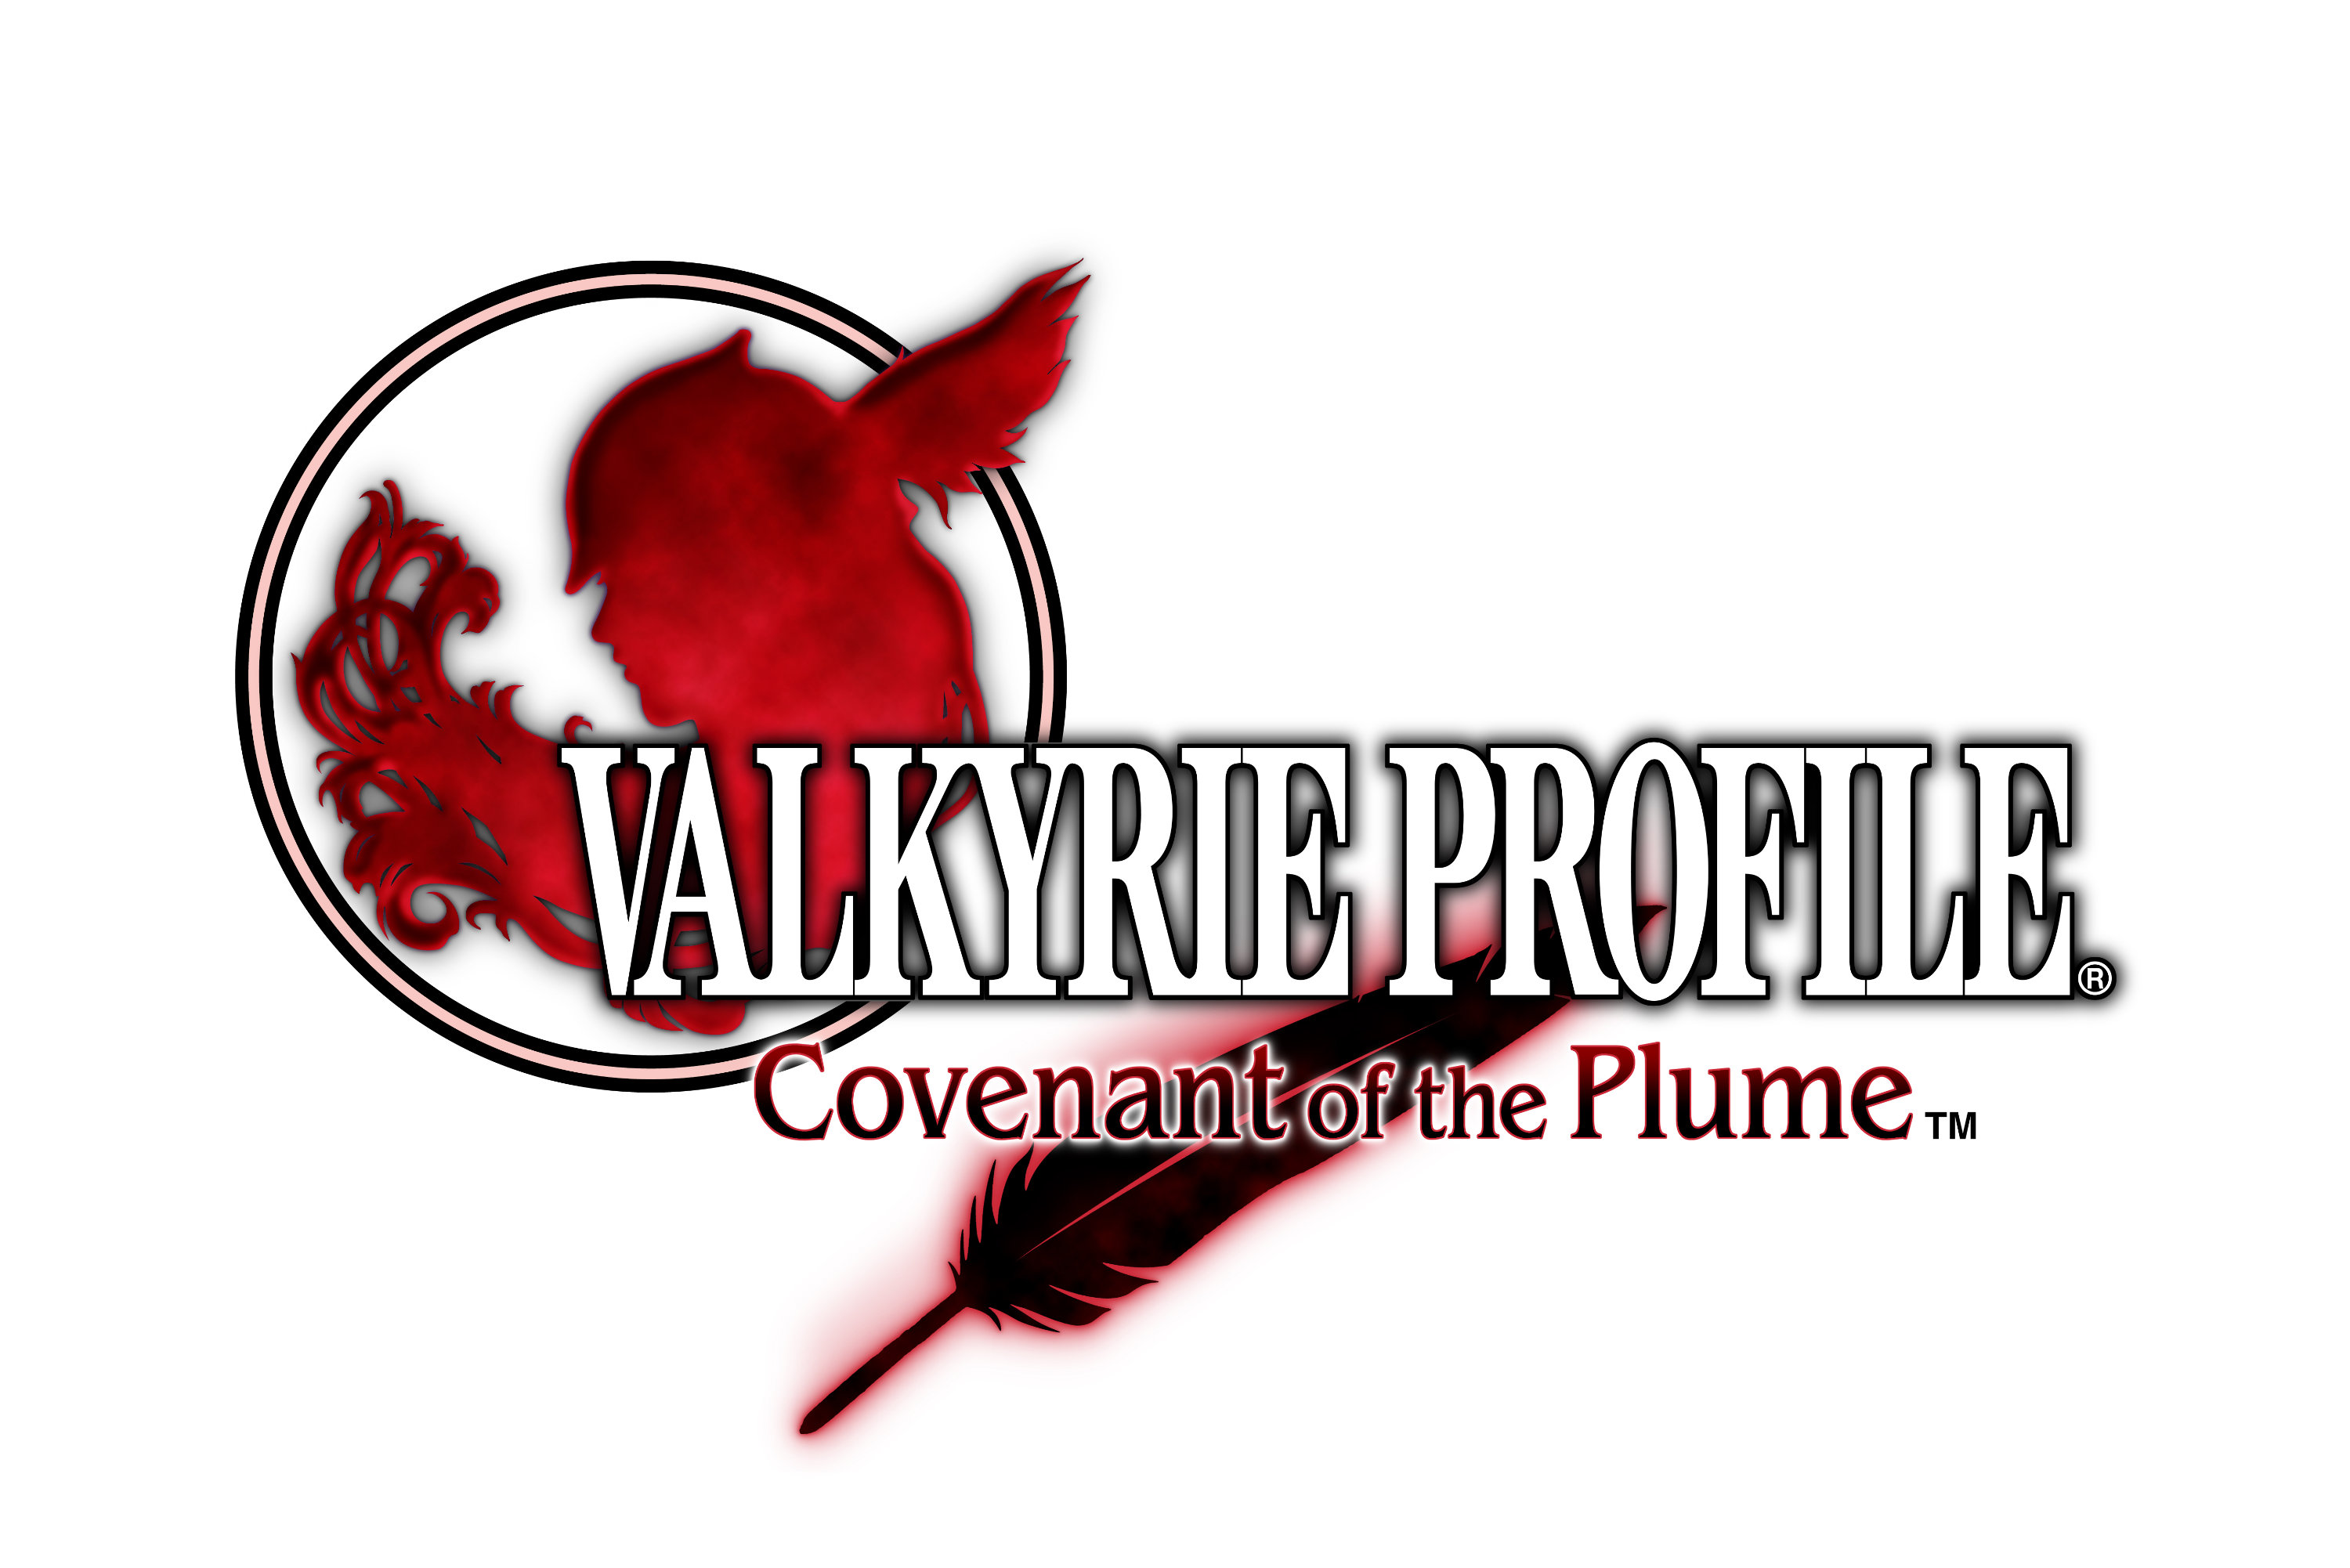 Valkyrie Profile Covenant of the Plume Logo US White